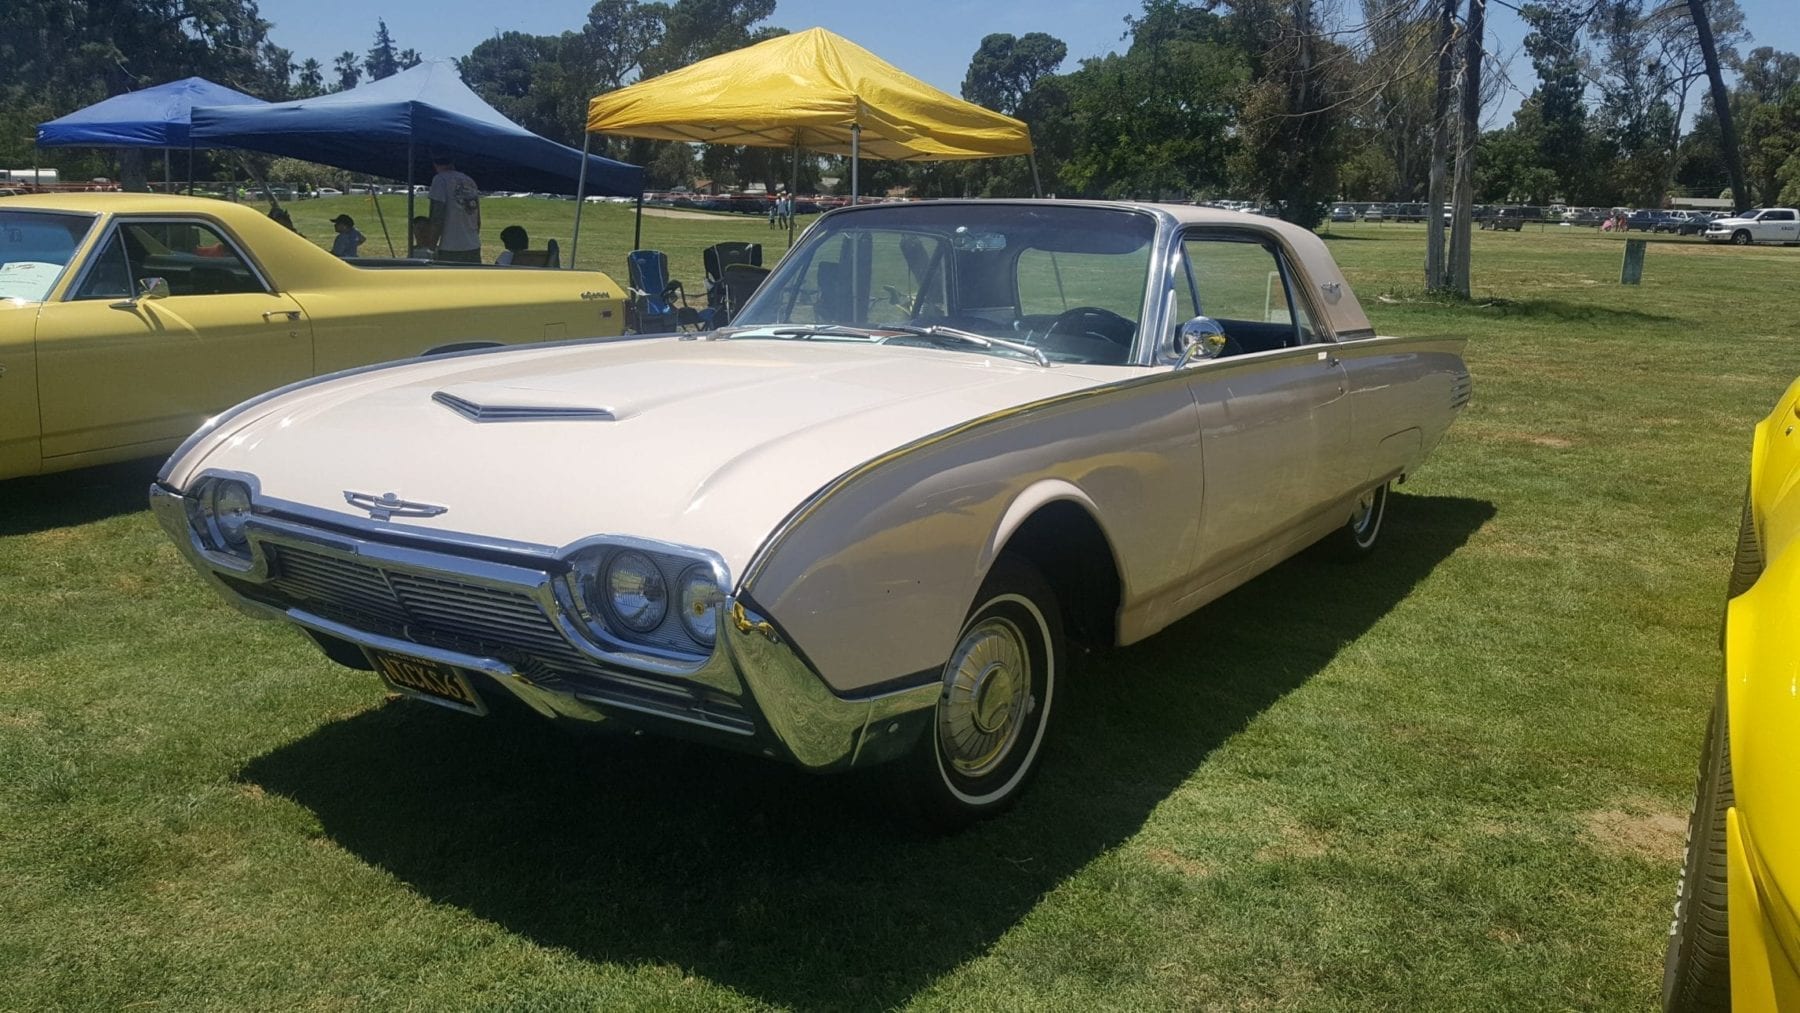 1962 TBird Featured parked in car show